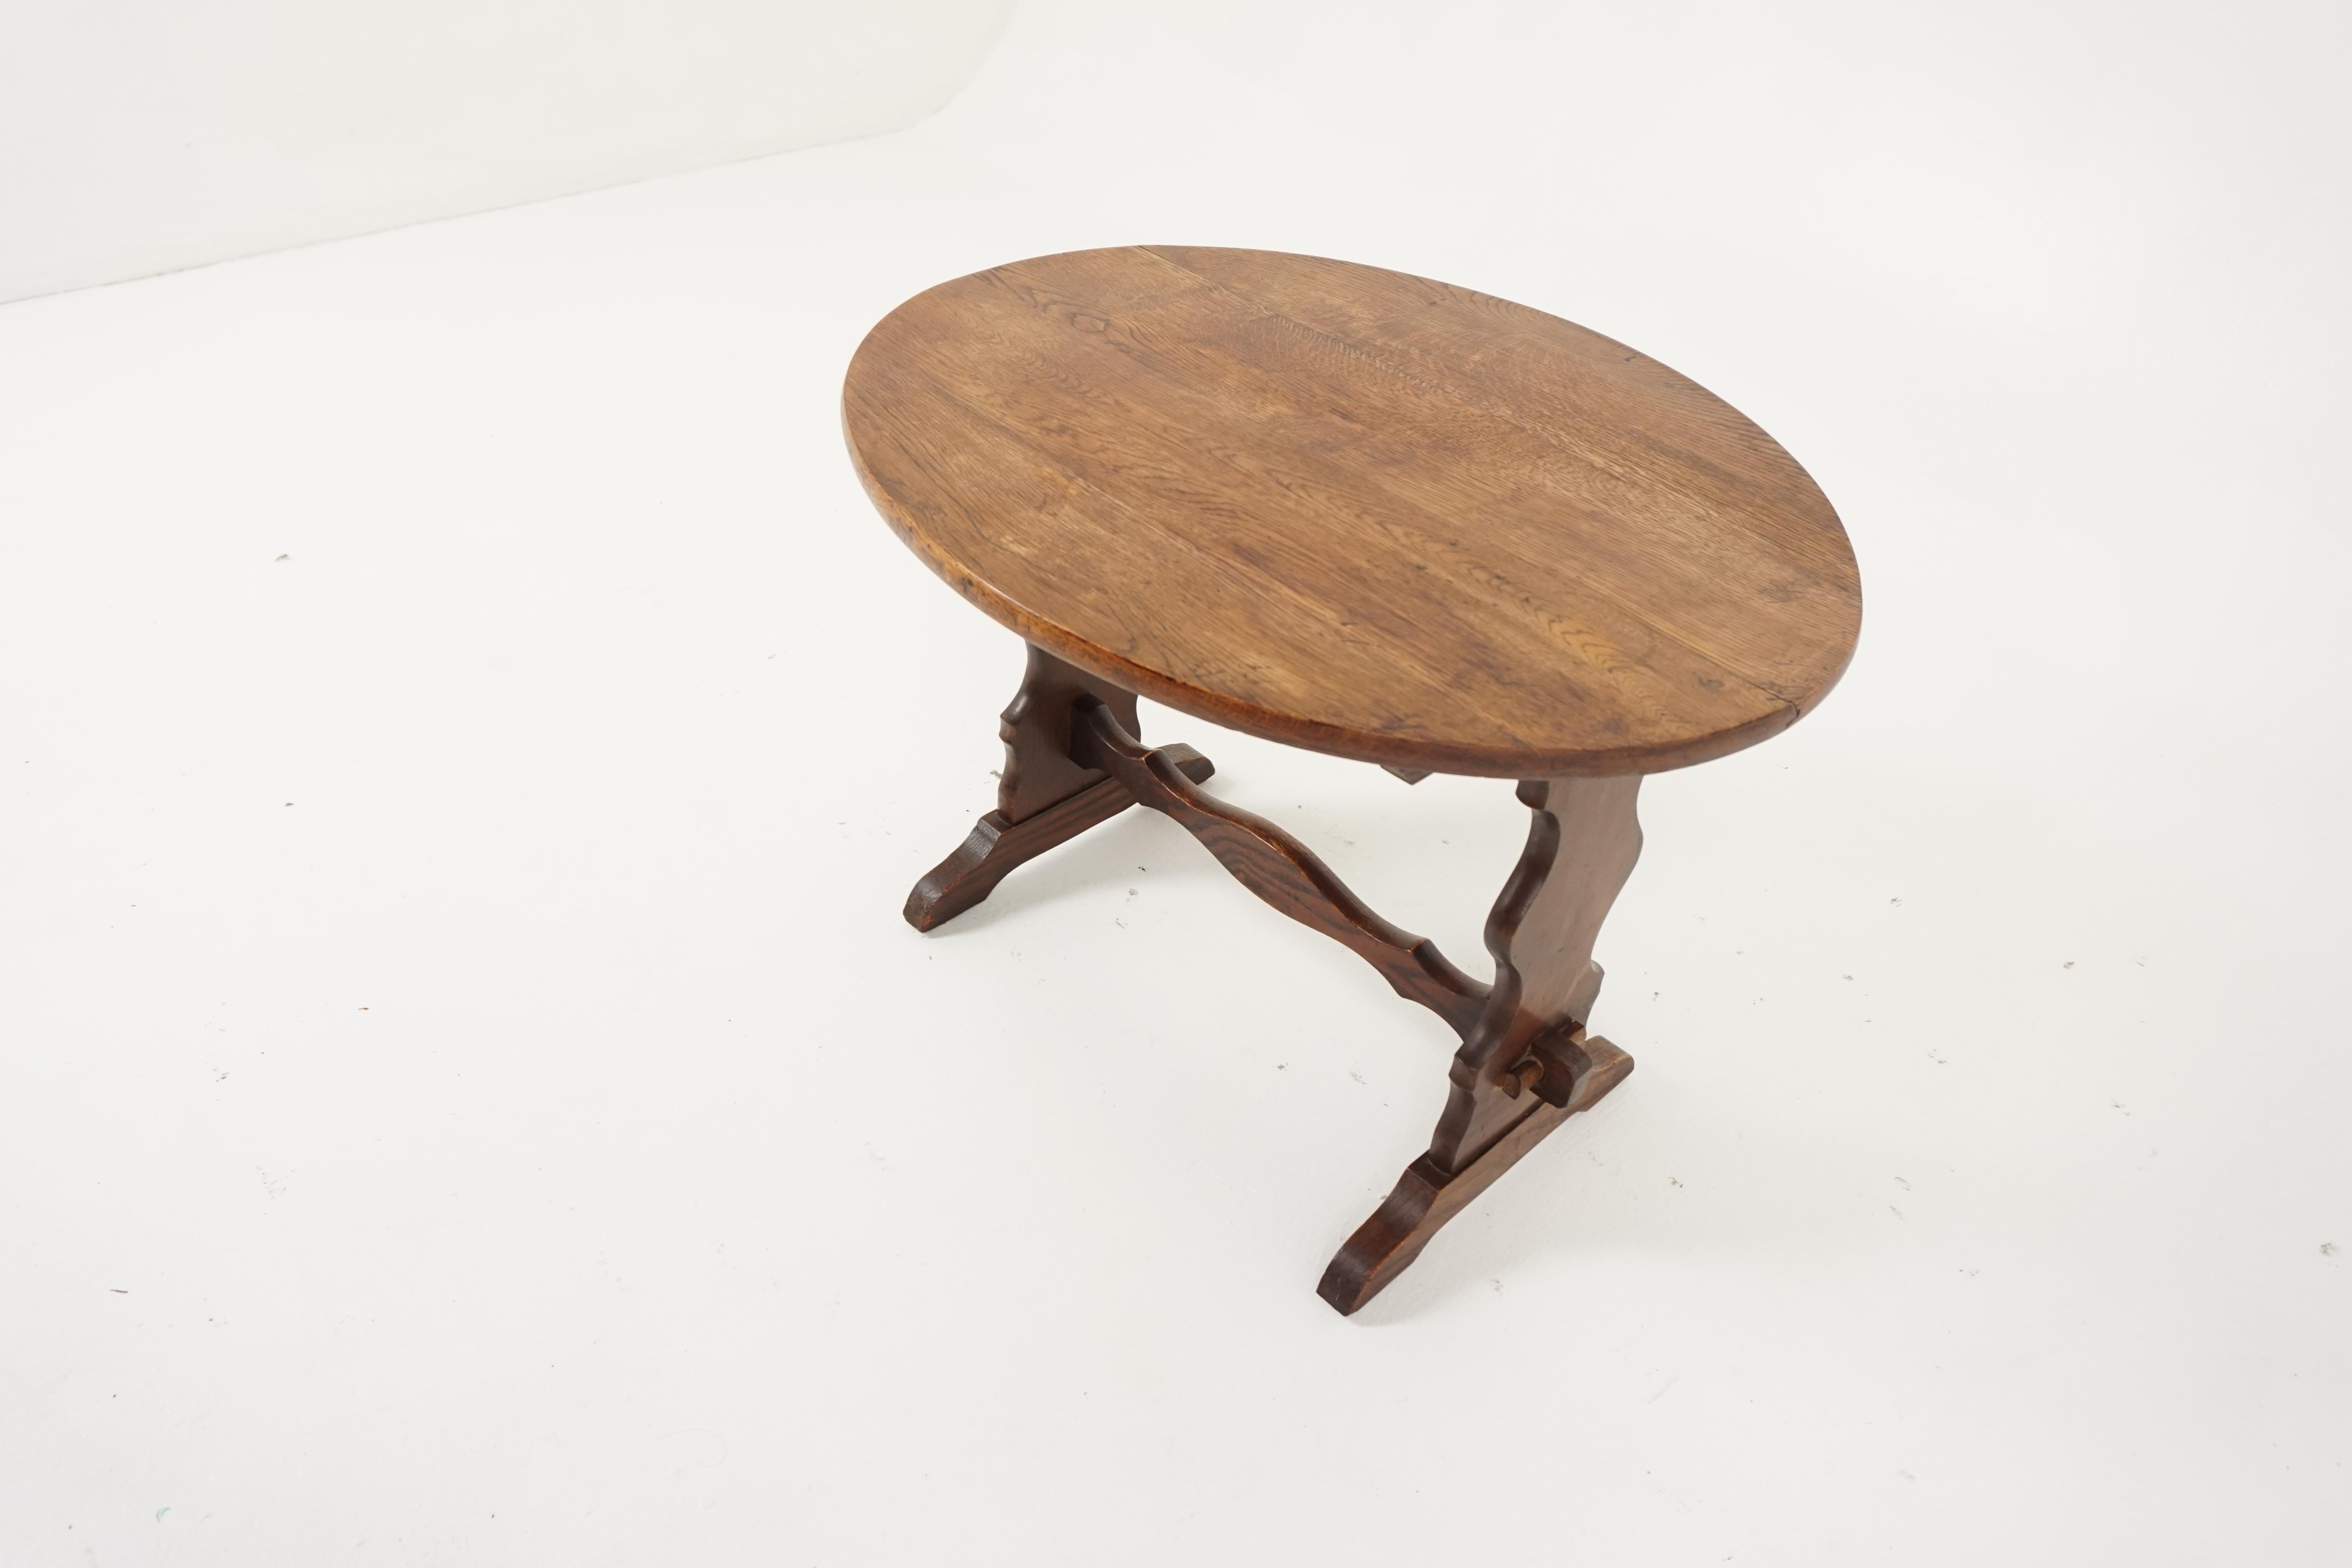 Vintage oval oak coffee table, end table, Scotland, 1930, B1884

Scotland, 1930
Solid oak
Original finish
Oval top
Pair of supports below
Single stretchers to the base
All joints are tight

$285

B1884

Measures: 26